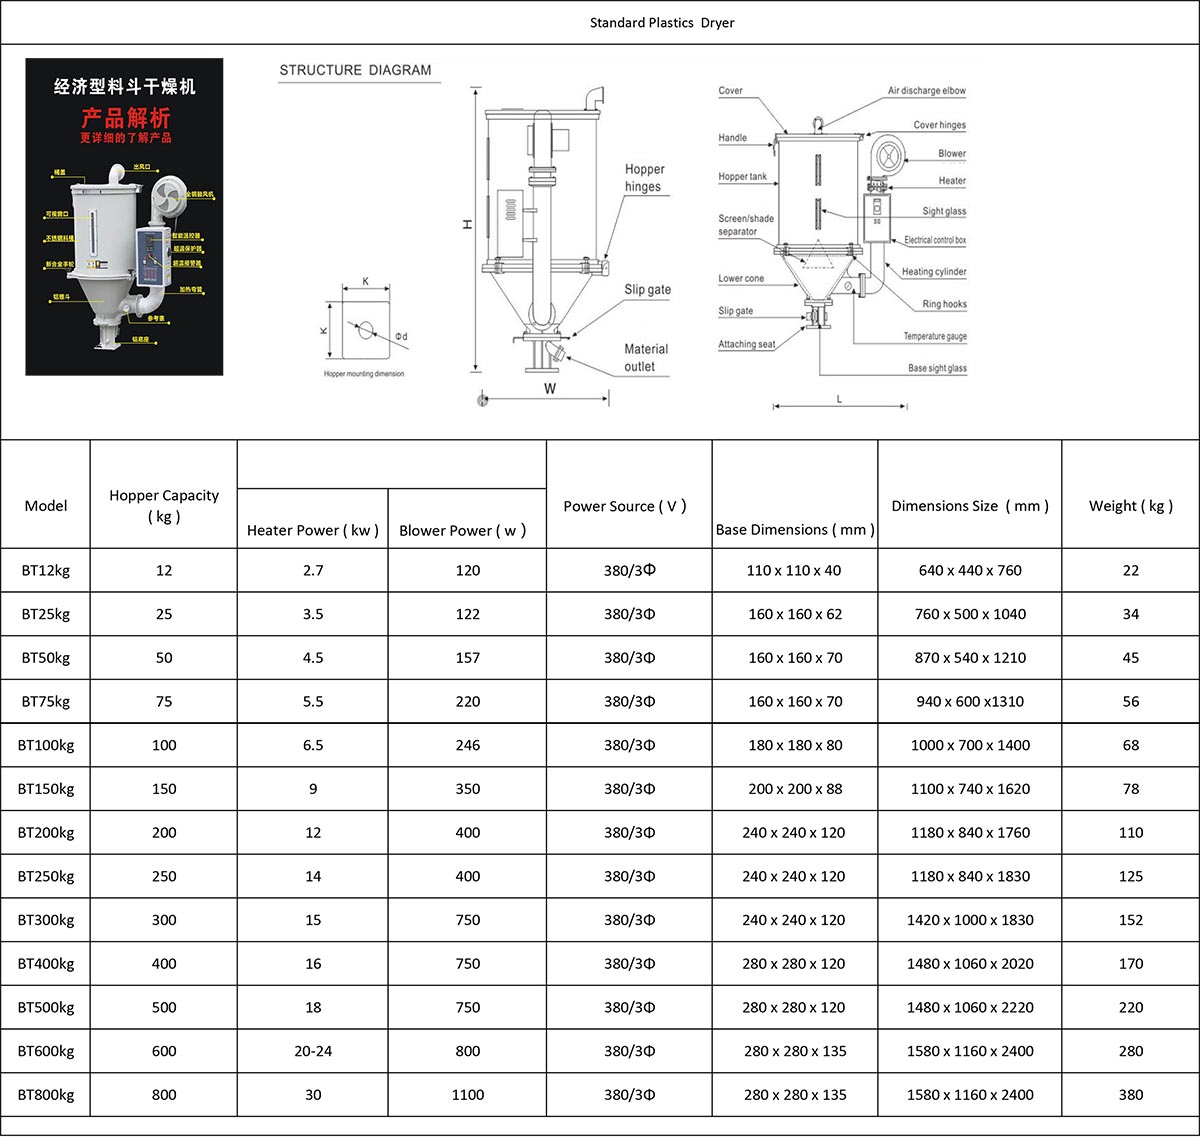 Standard Plastic Dryer Structure Diagram and Parameters